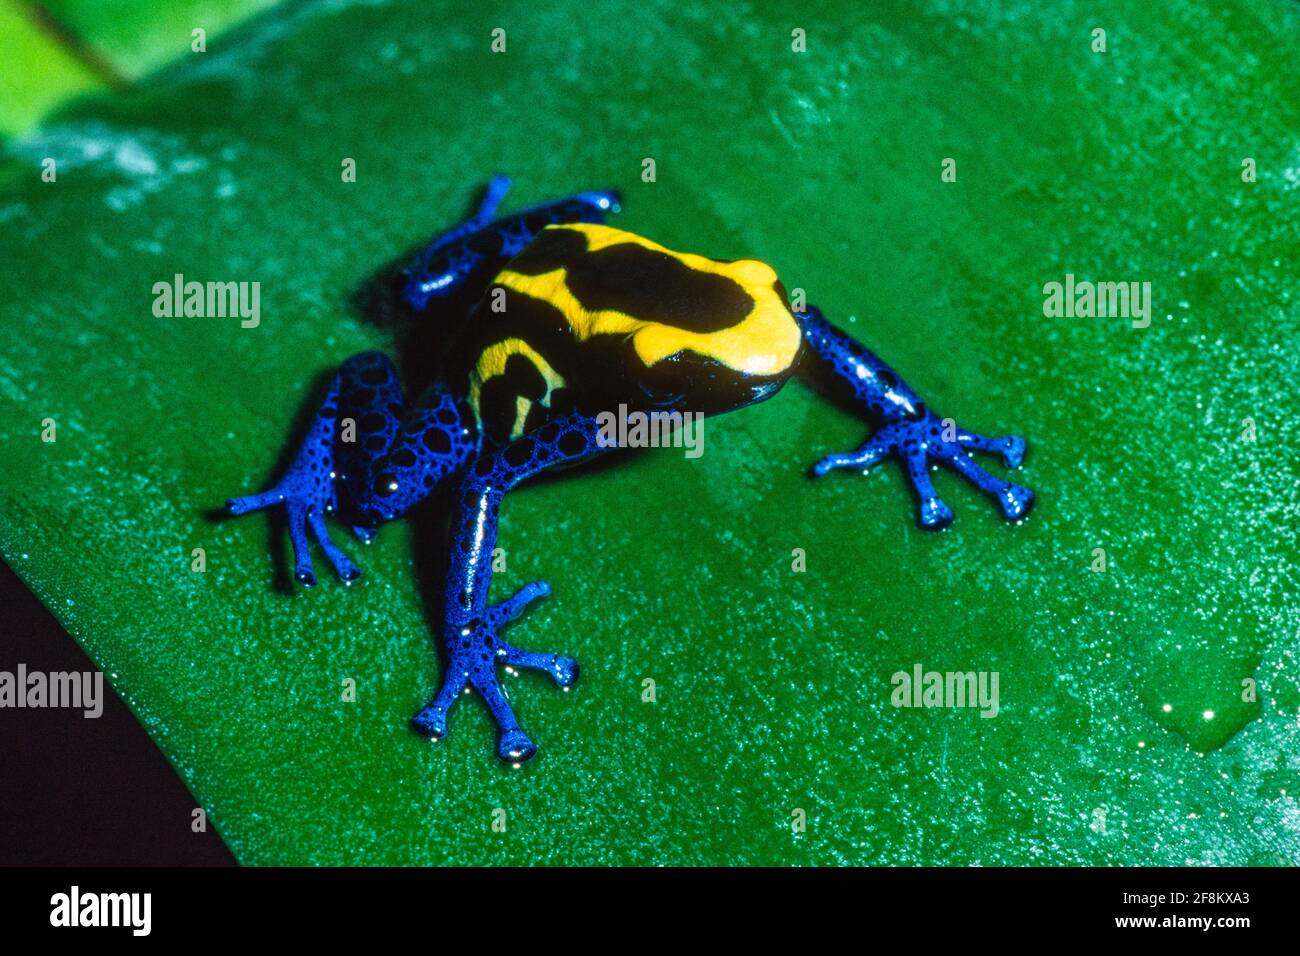 The Dyeing Poison Frog, Dendrobates tinctorius, is found in the tropical rainforests of Guyana, Suriname, French Guiana, and Brazil. Stock Photo